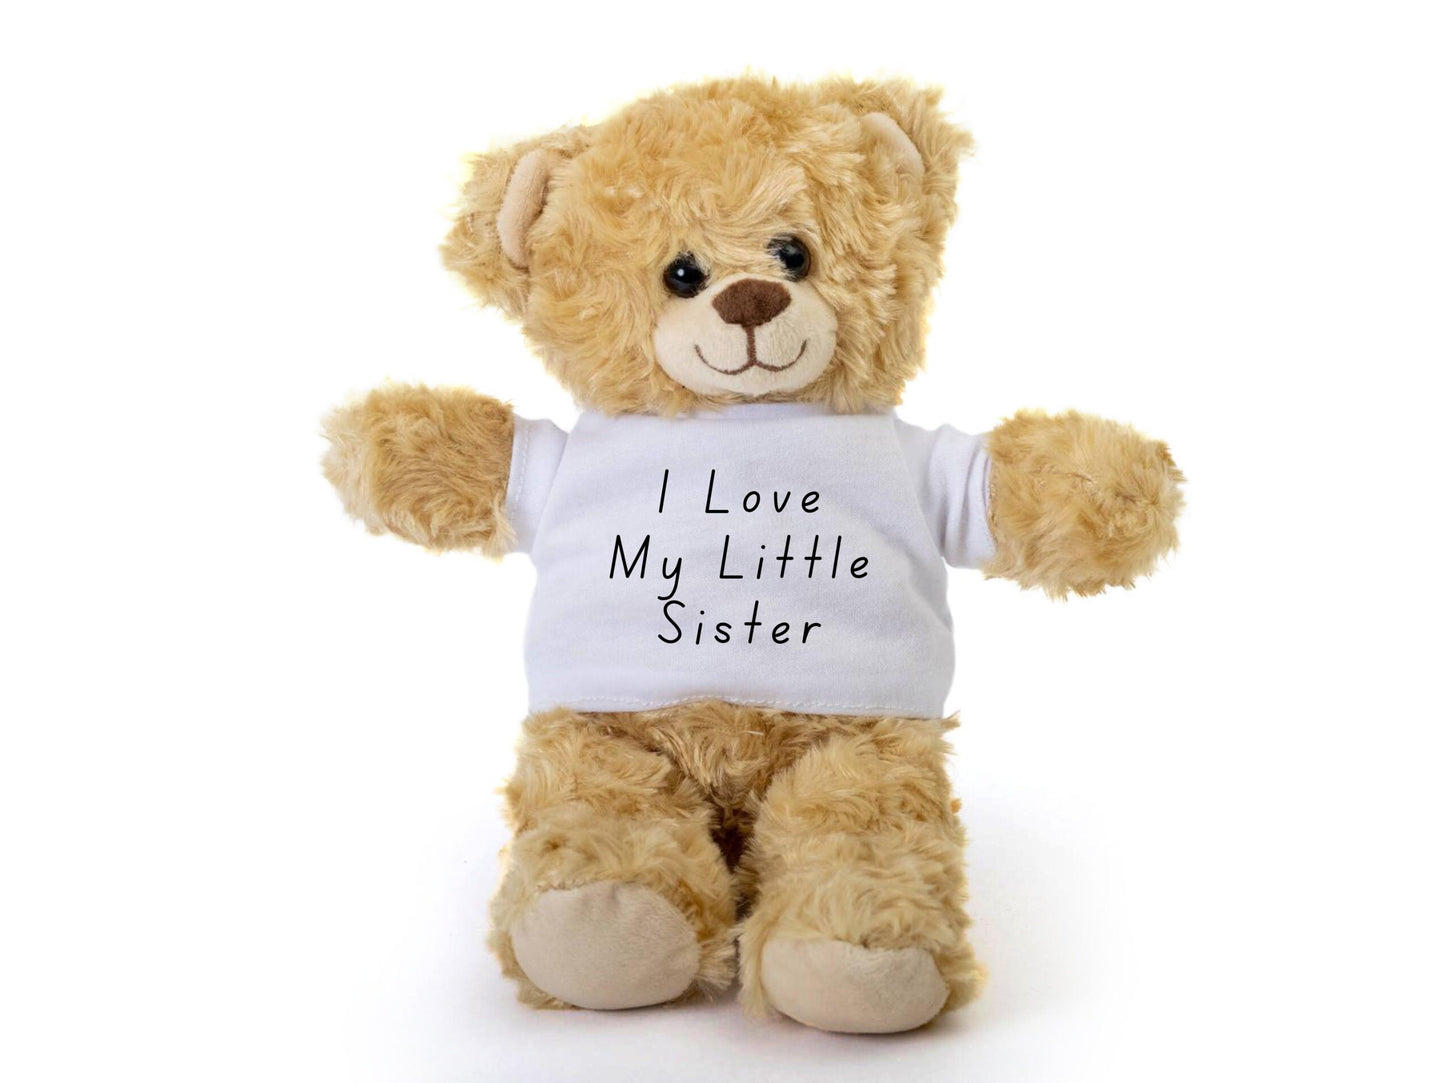 Sibling Teddy Bears - Going to Be A Big Sister, Big Brother, Little Sister, Big Sister, Little Brother, Customize Teddy Bears For New Baby